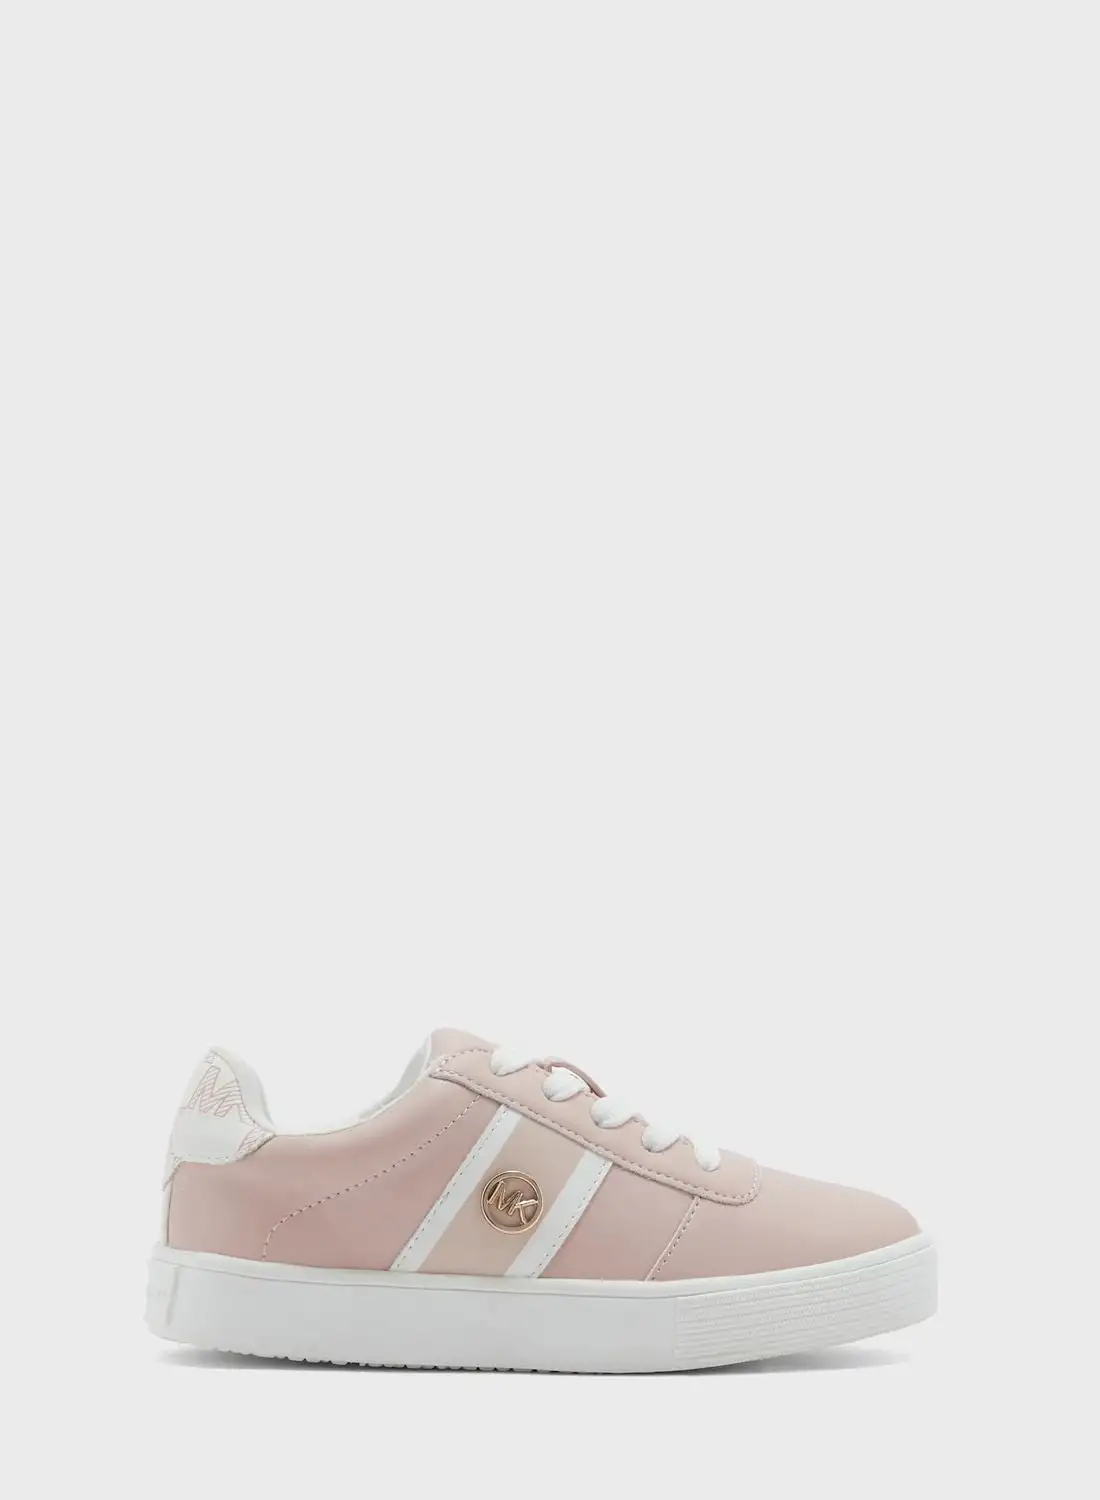 Michael Kors Youth Kylen 3 Lace Up Sneakers